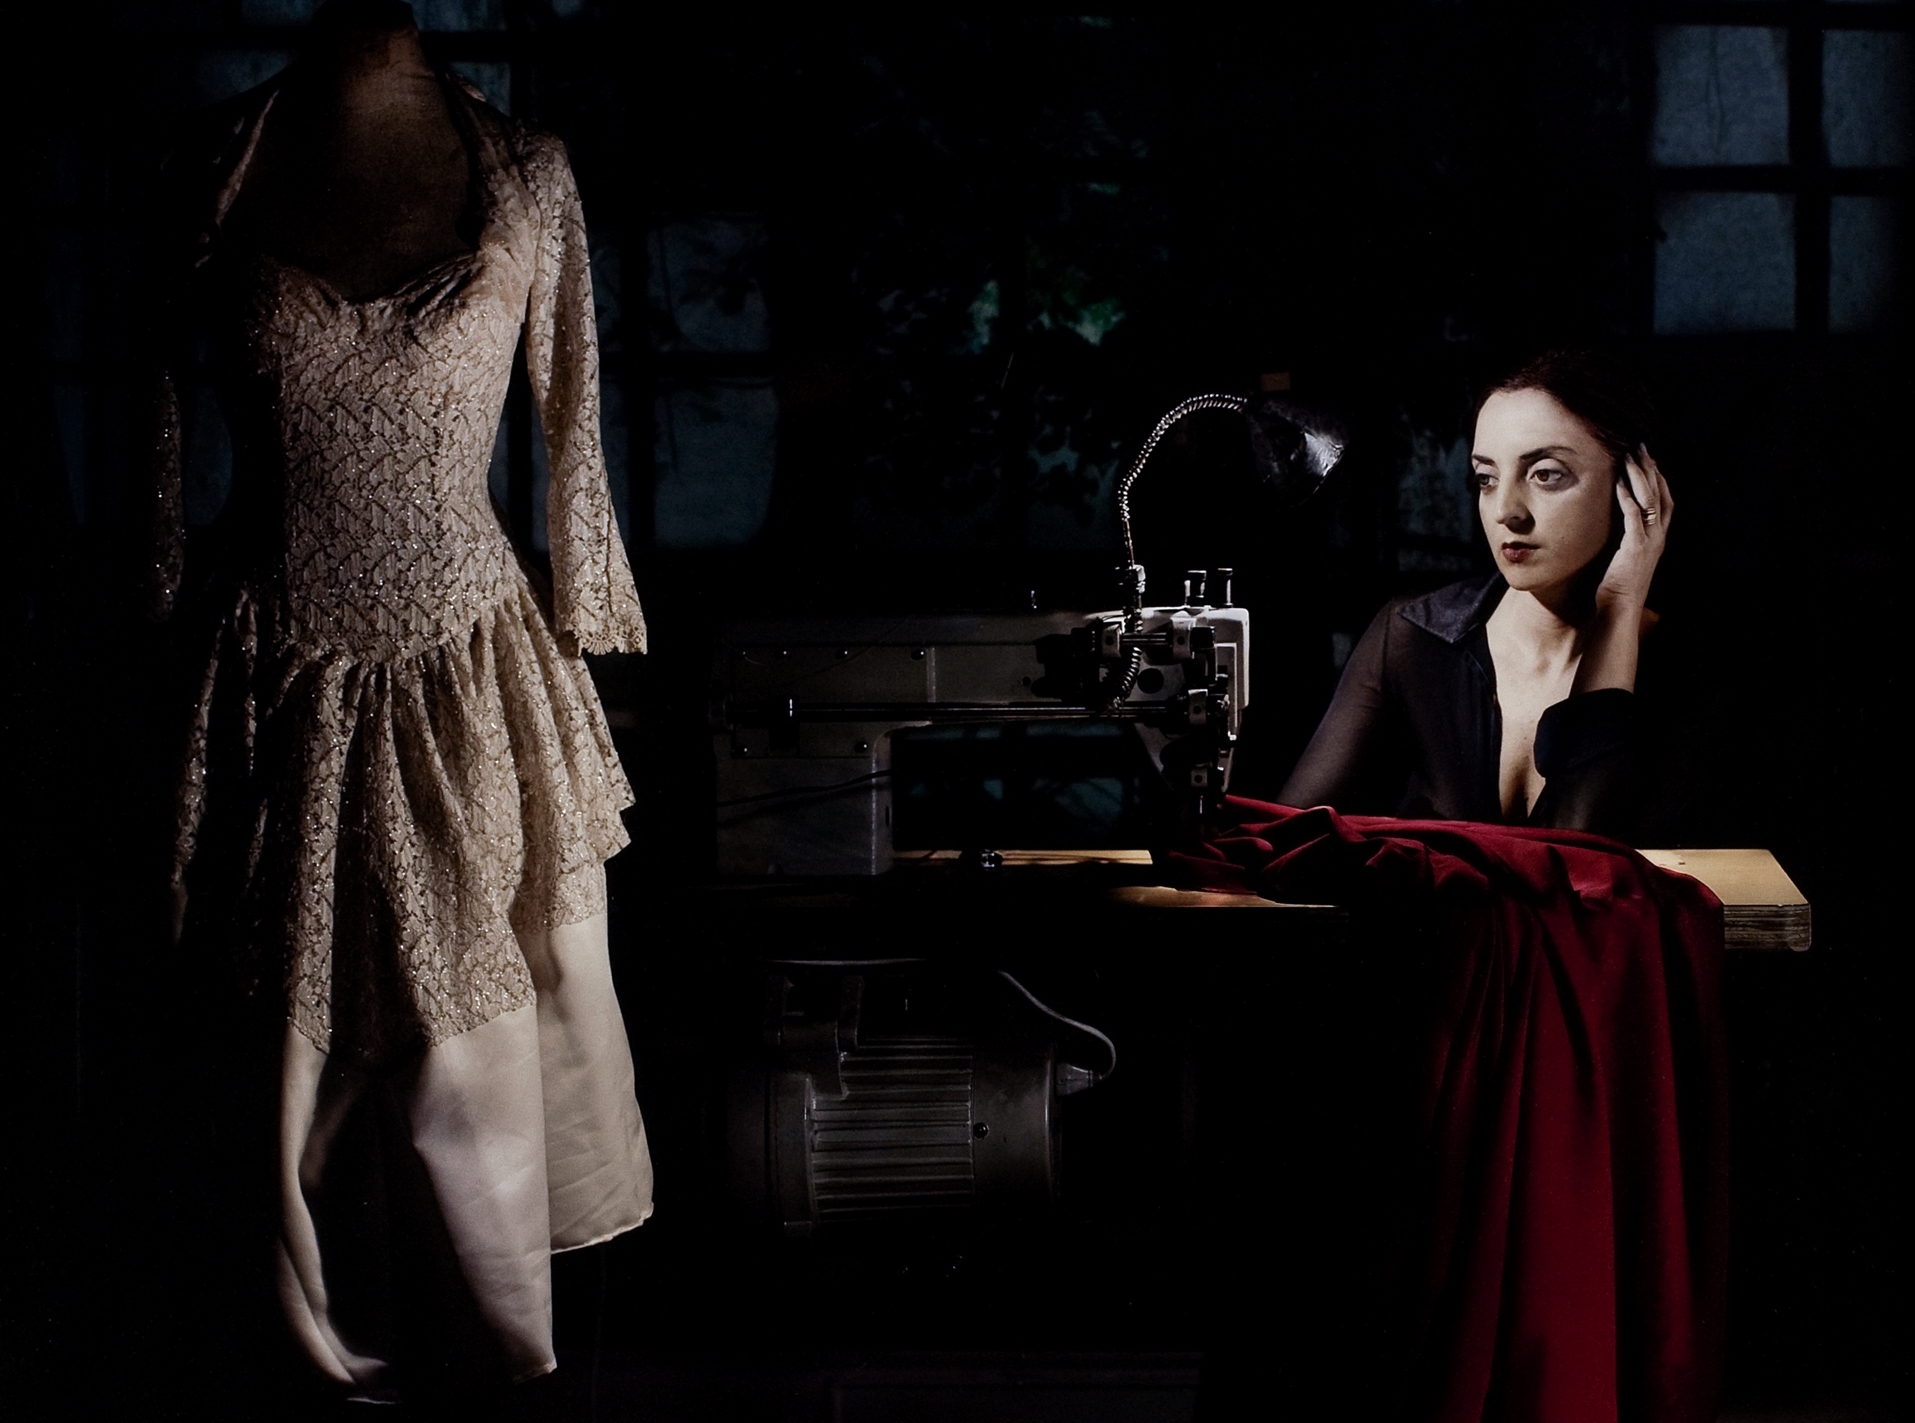 Nicola Costantino at sewing machine looking at a dress on a mannequin. Dark lighting creating a high contrast from Costantino's skin.